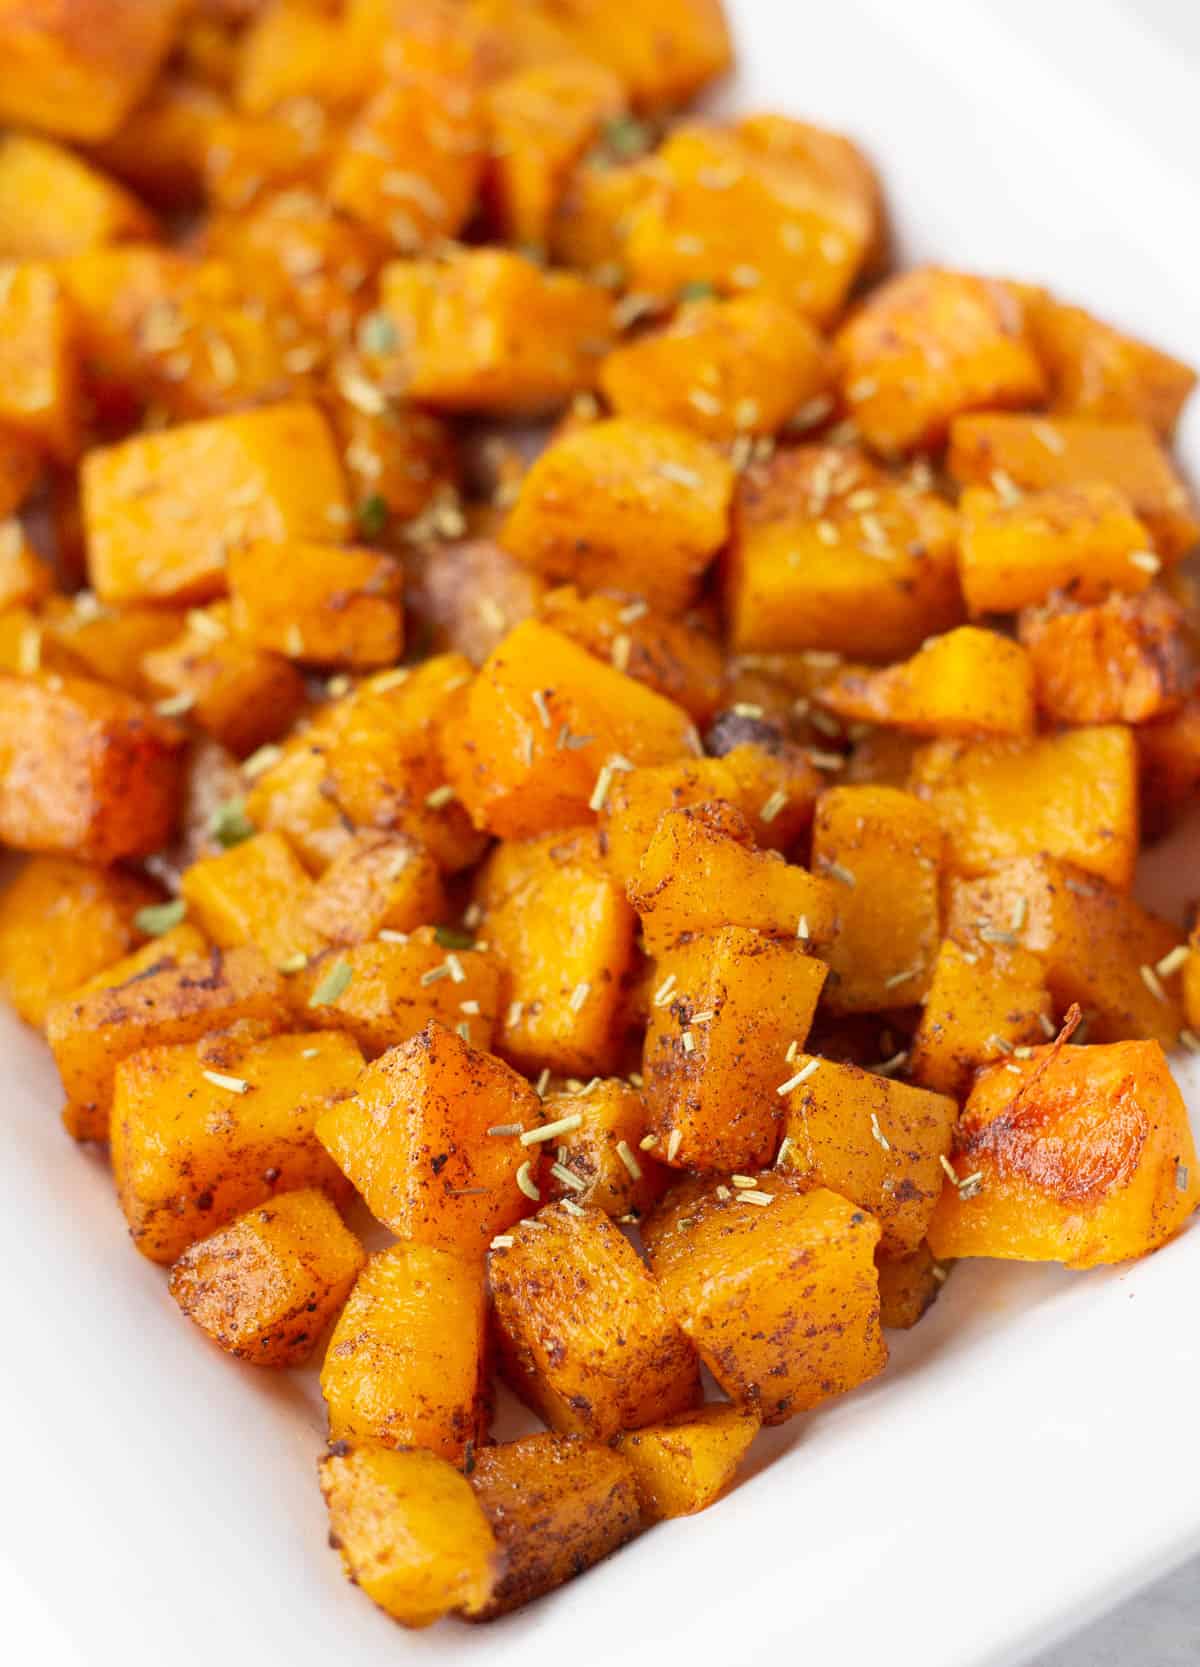 cinnamon butternut squash topped with herbs